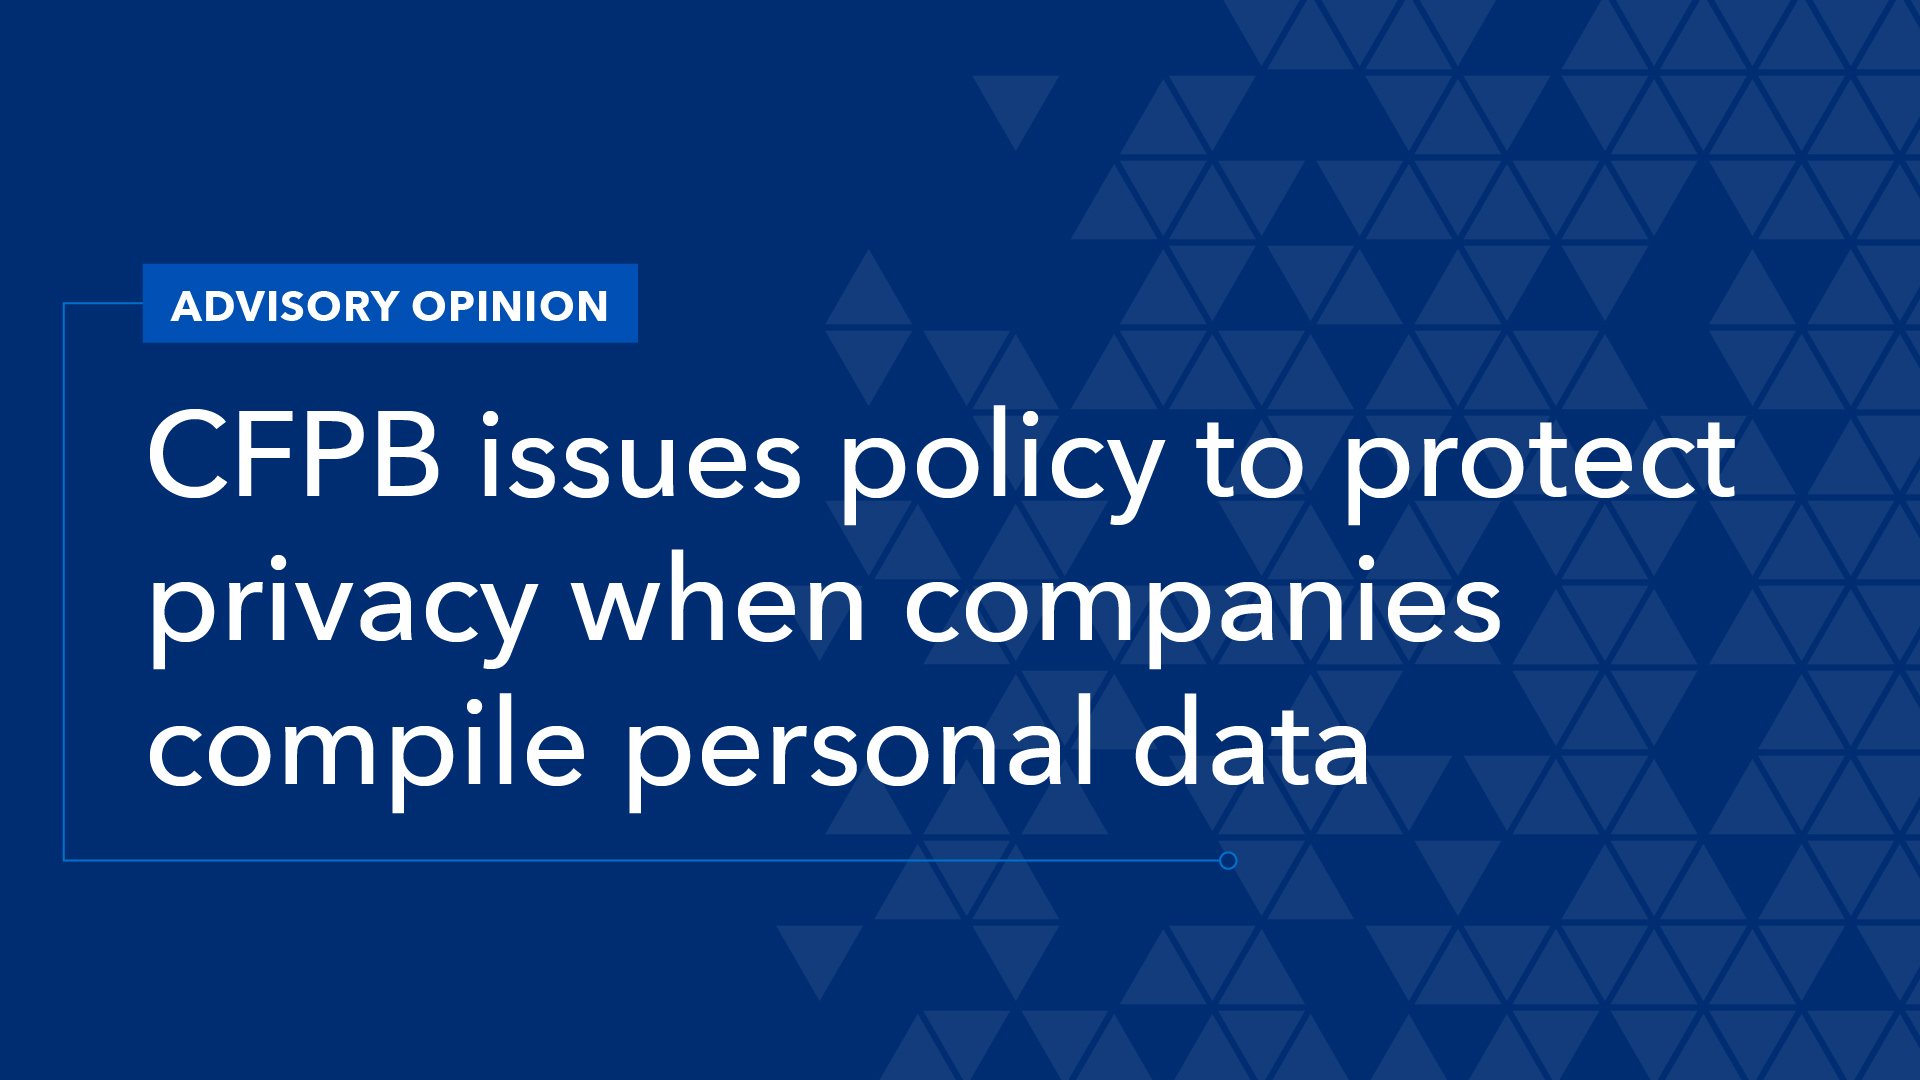 CFPB Issues Advisory to Protect Privacy When Companies Compile Personal Data